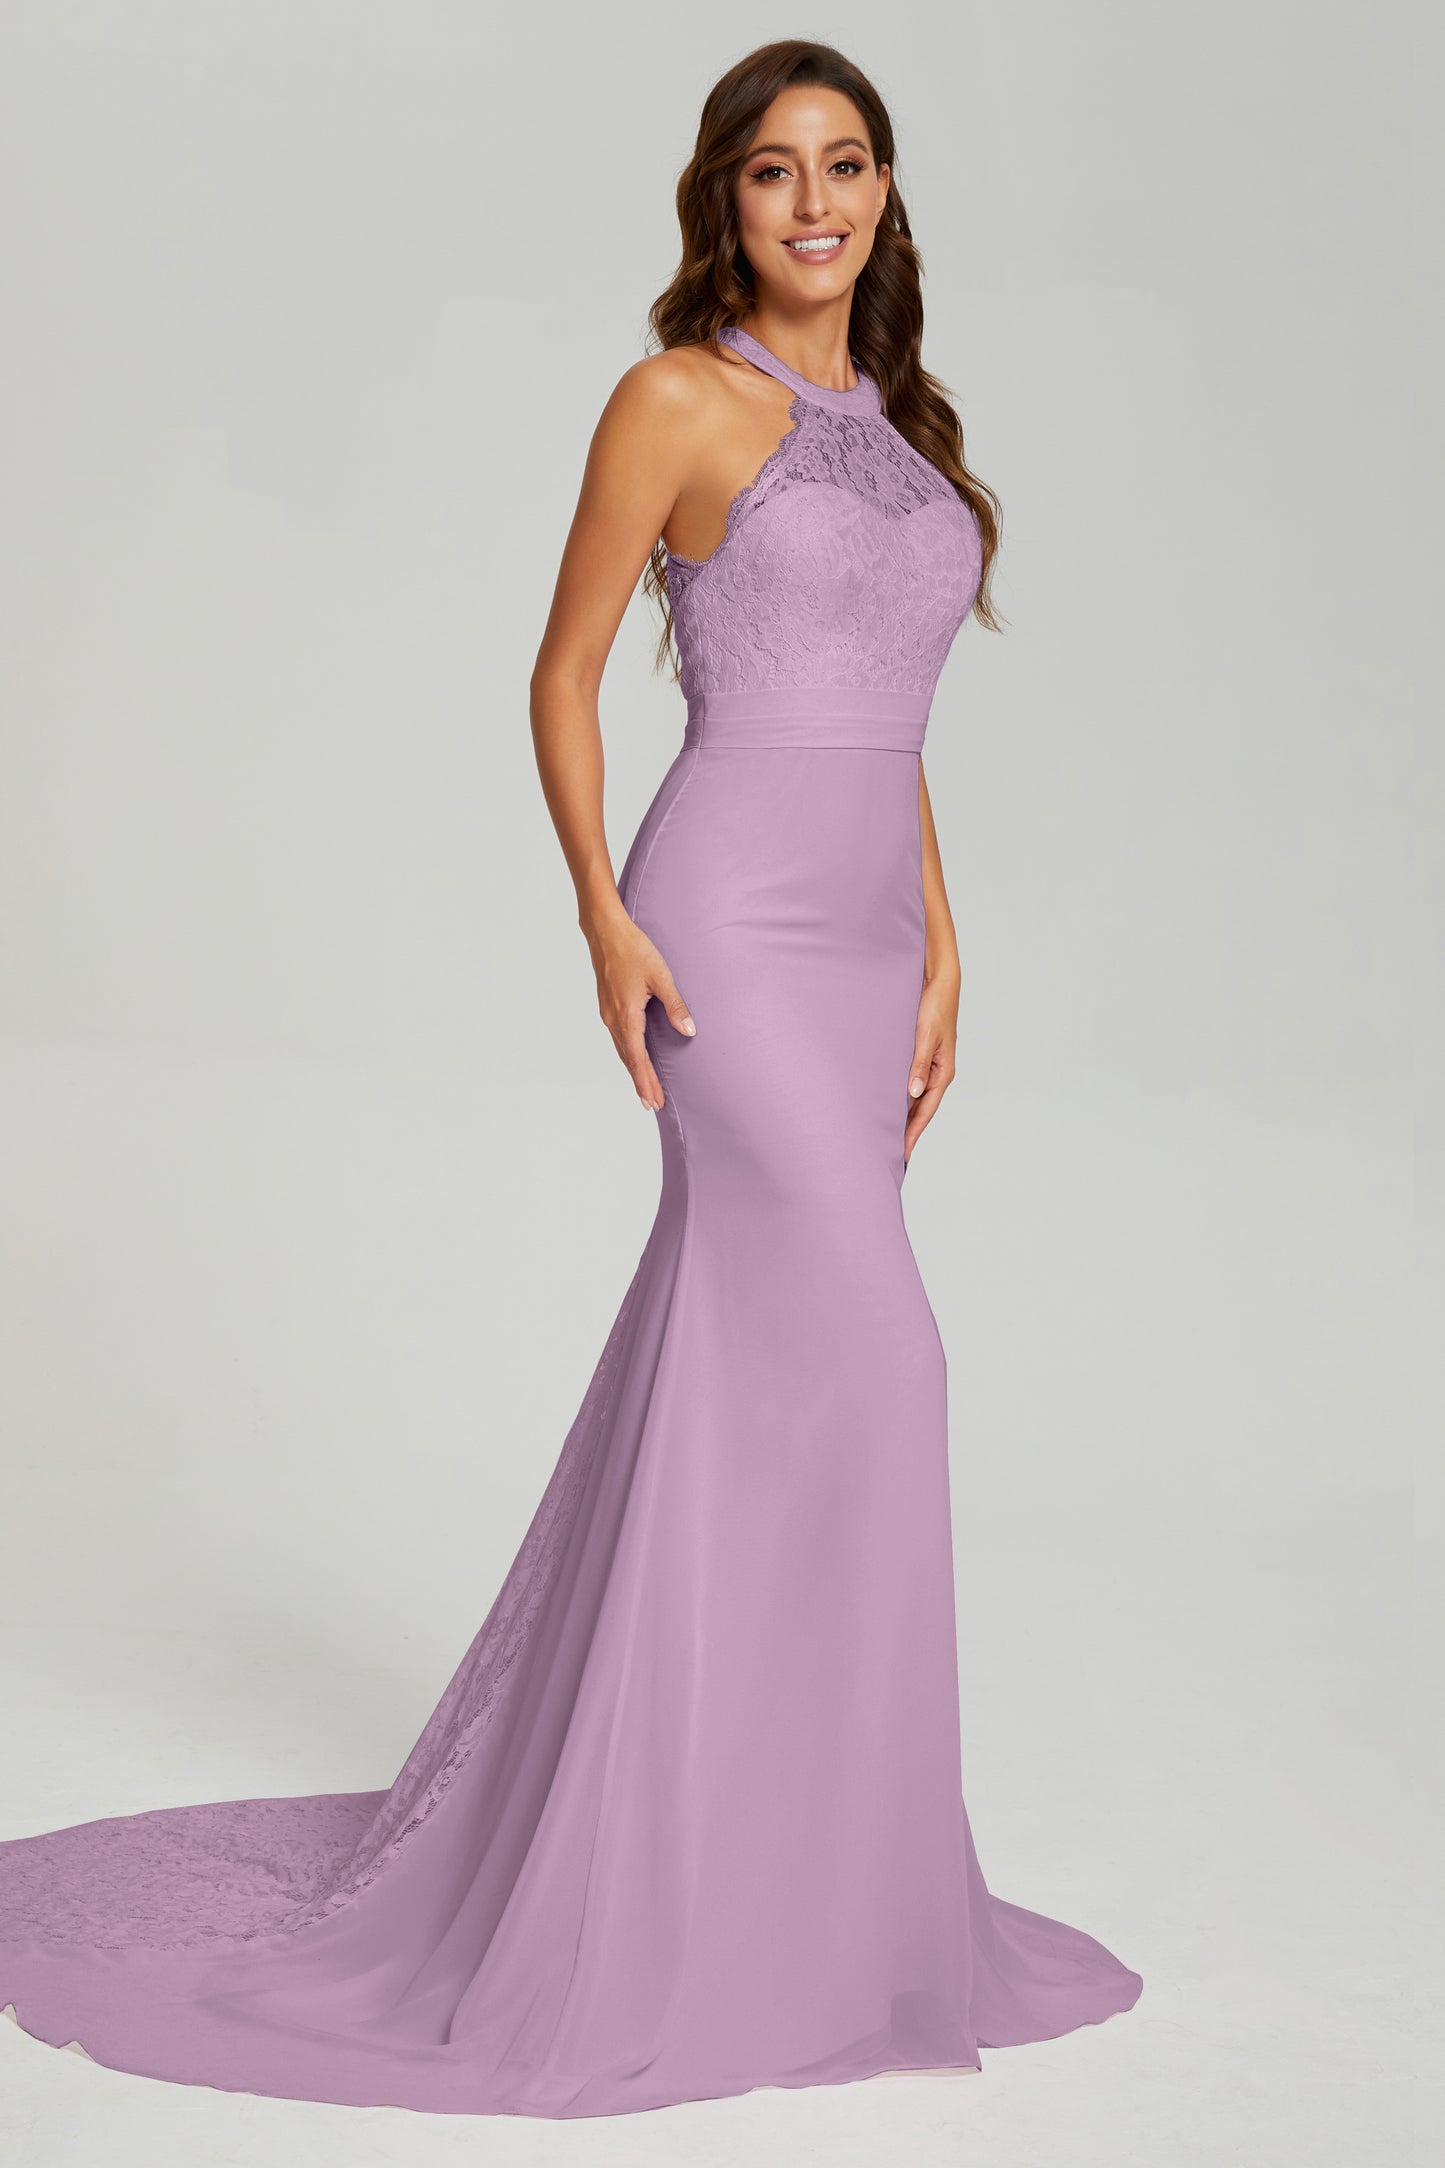 Halter Mermaid Lace Prom Dresses with Trailing